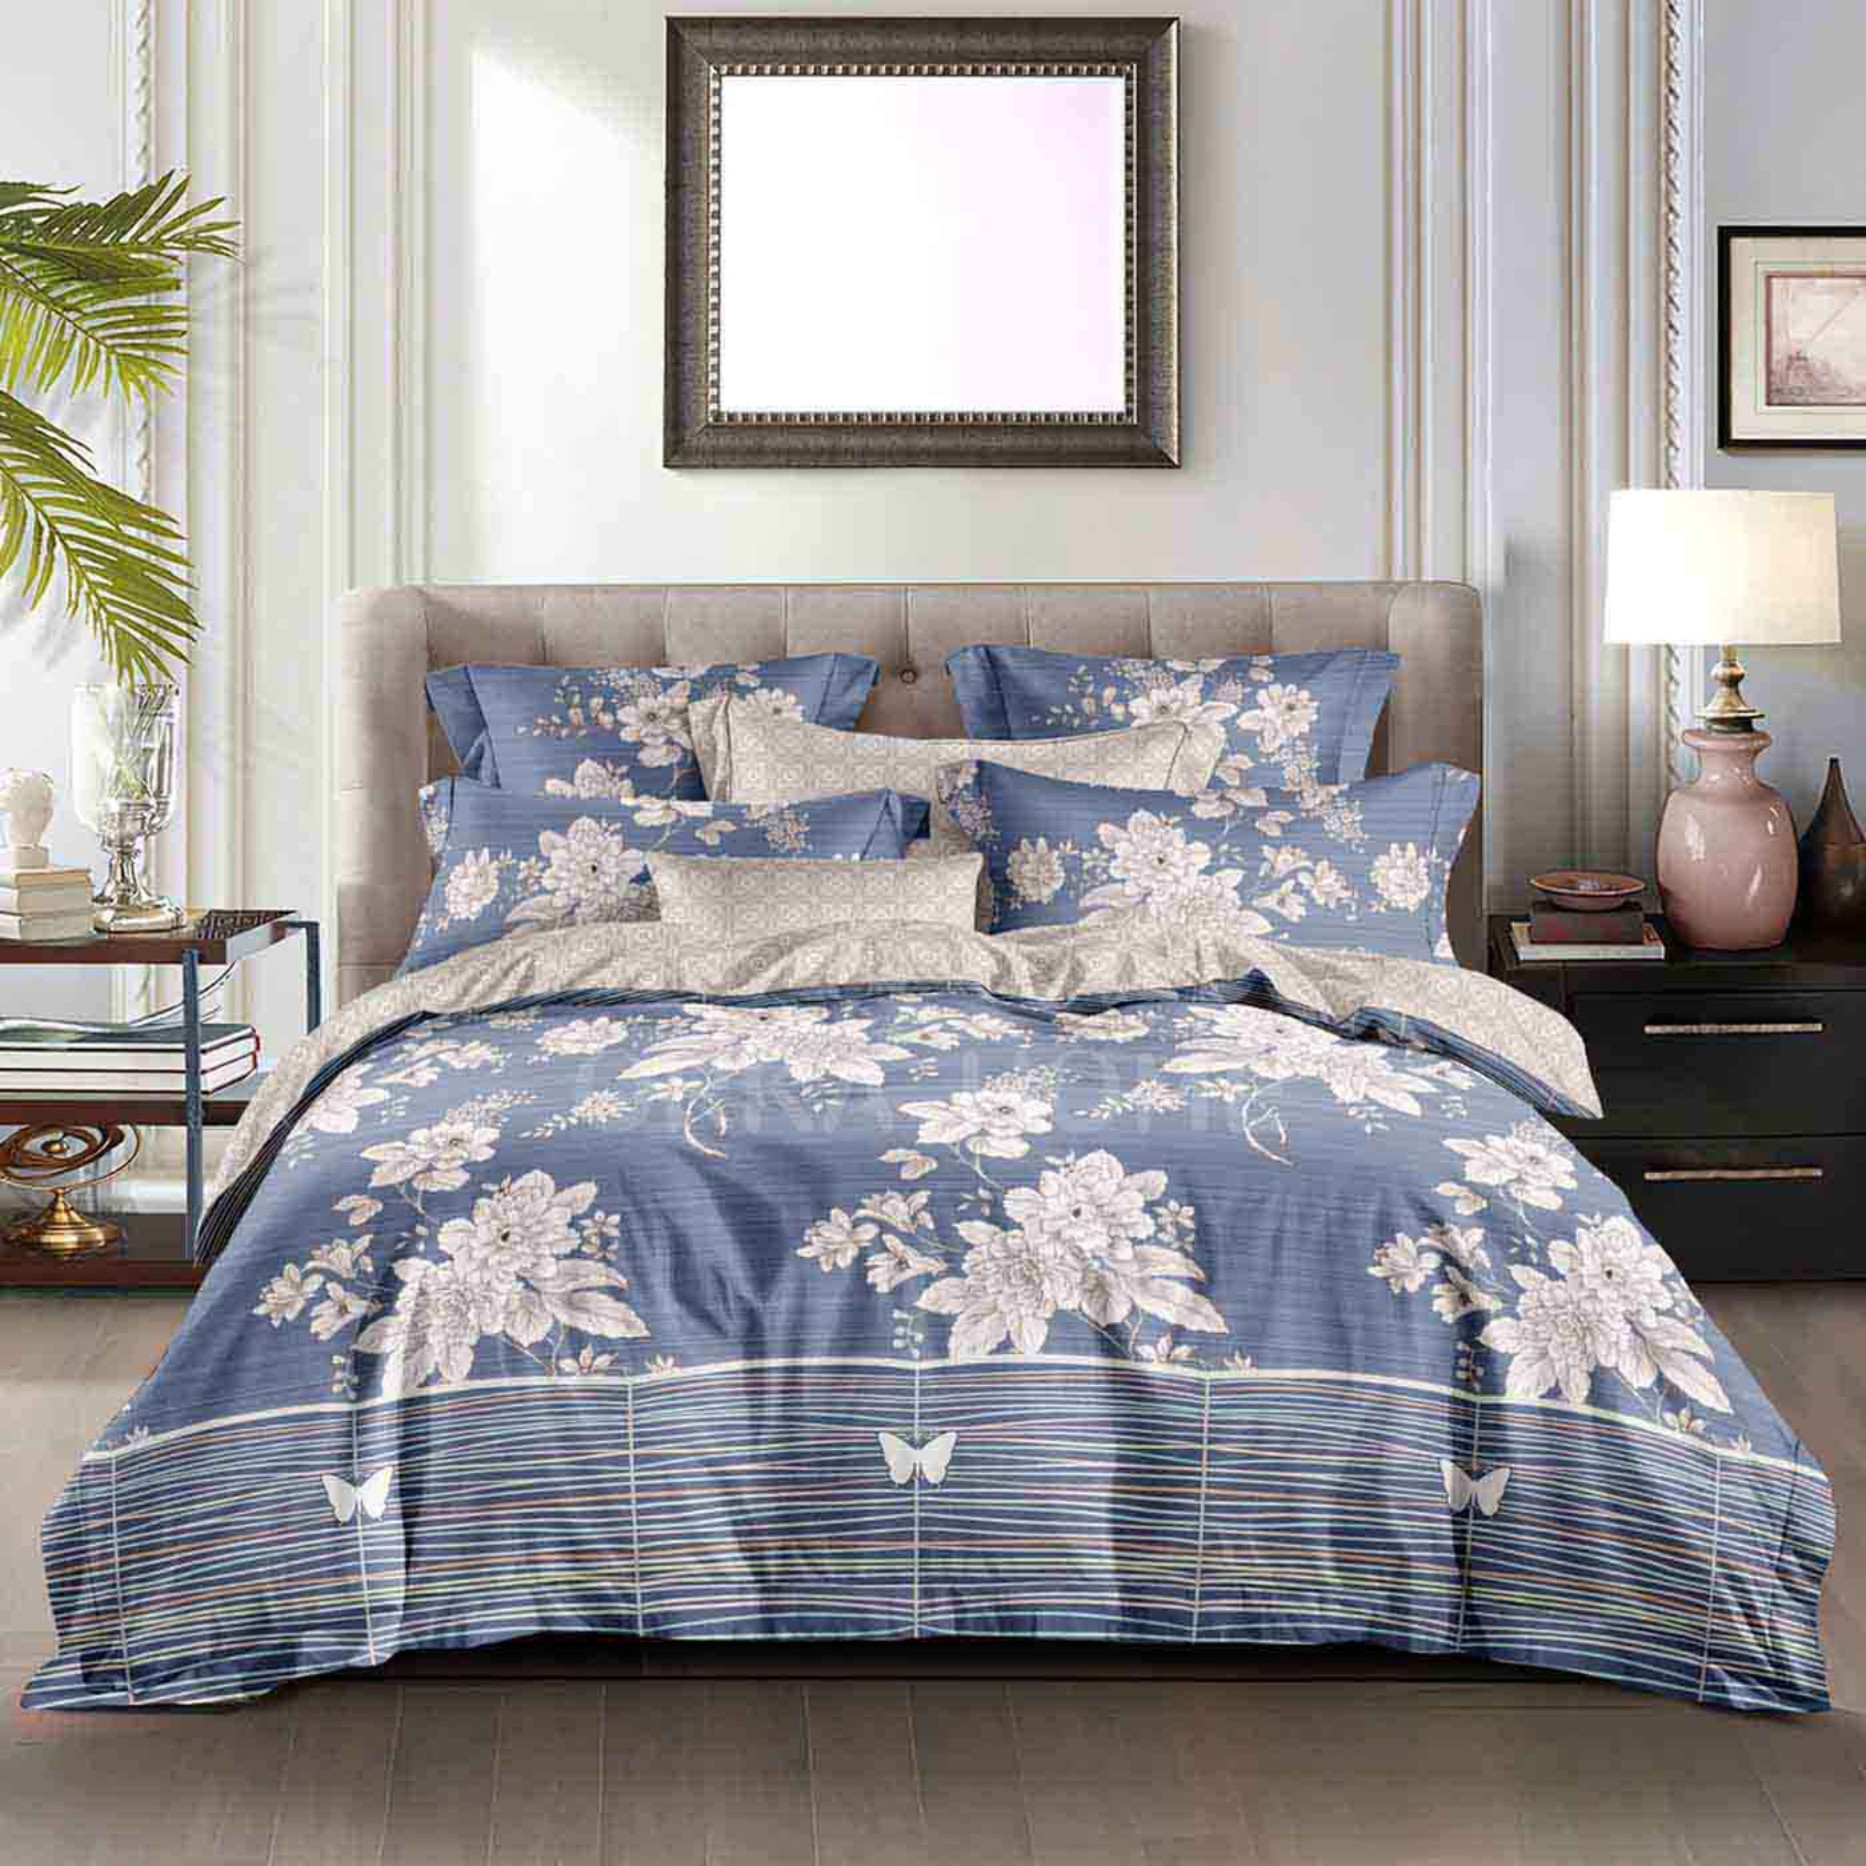 ORKA HOME Valencia King Bed Sheet Poly Cotton Printed Flower  